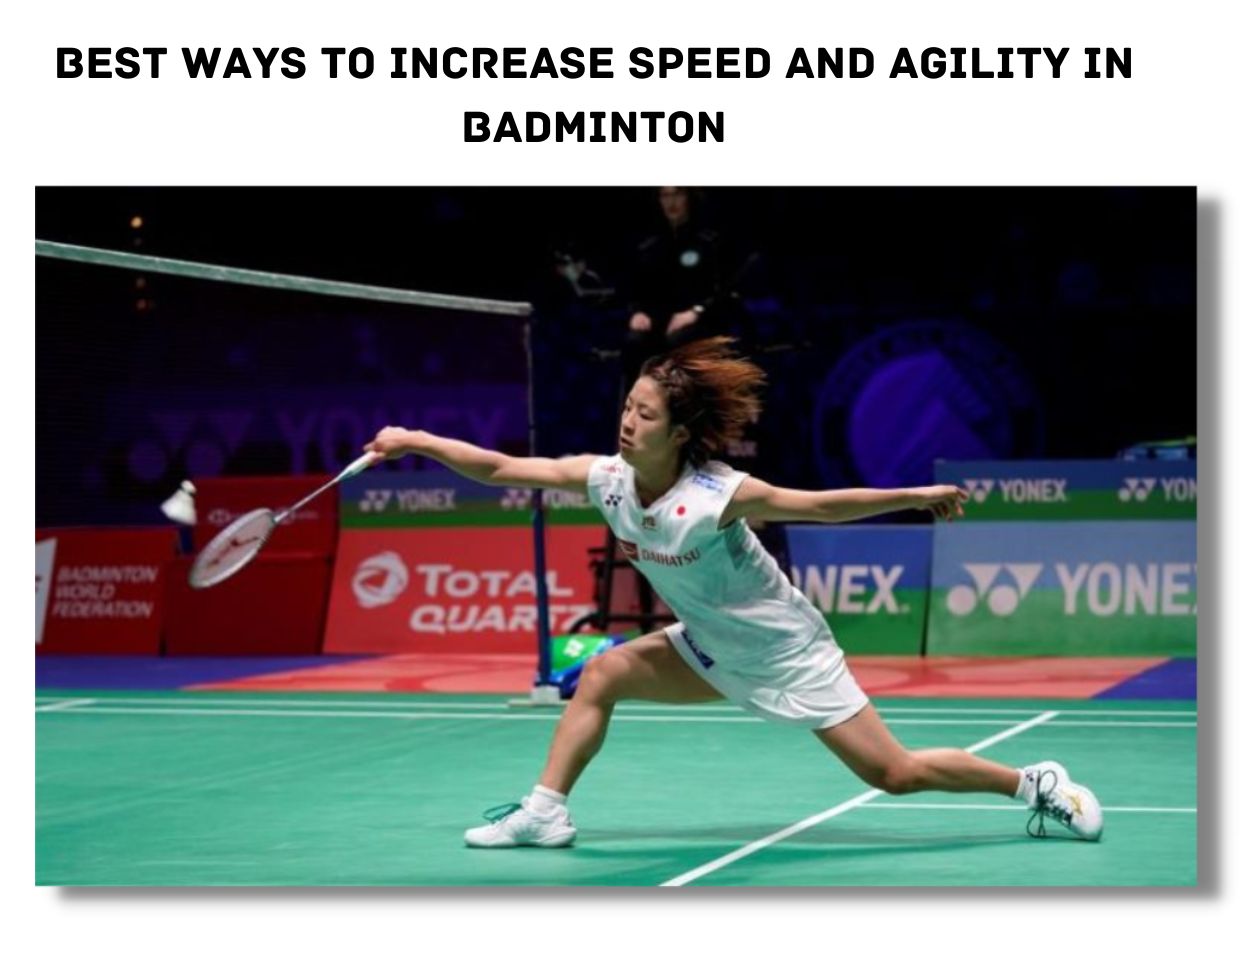 Best Ways To Increase Speed and Agility In Badminton